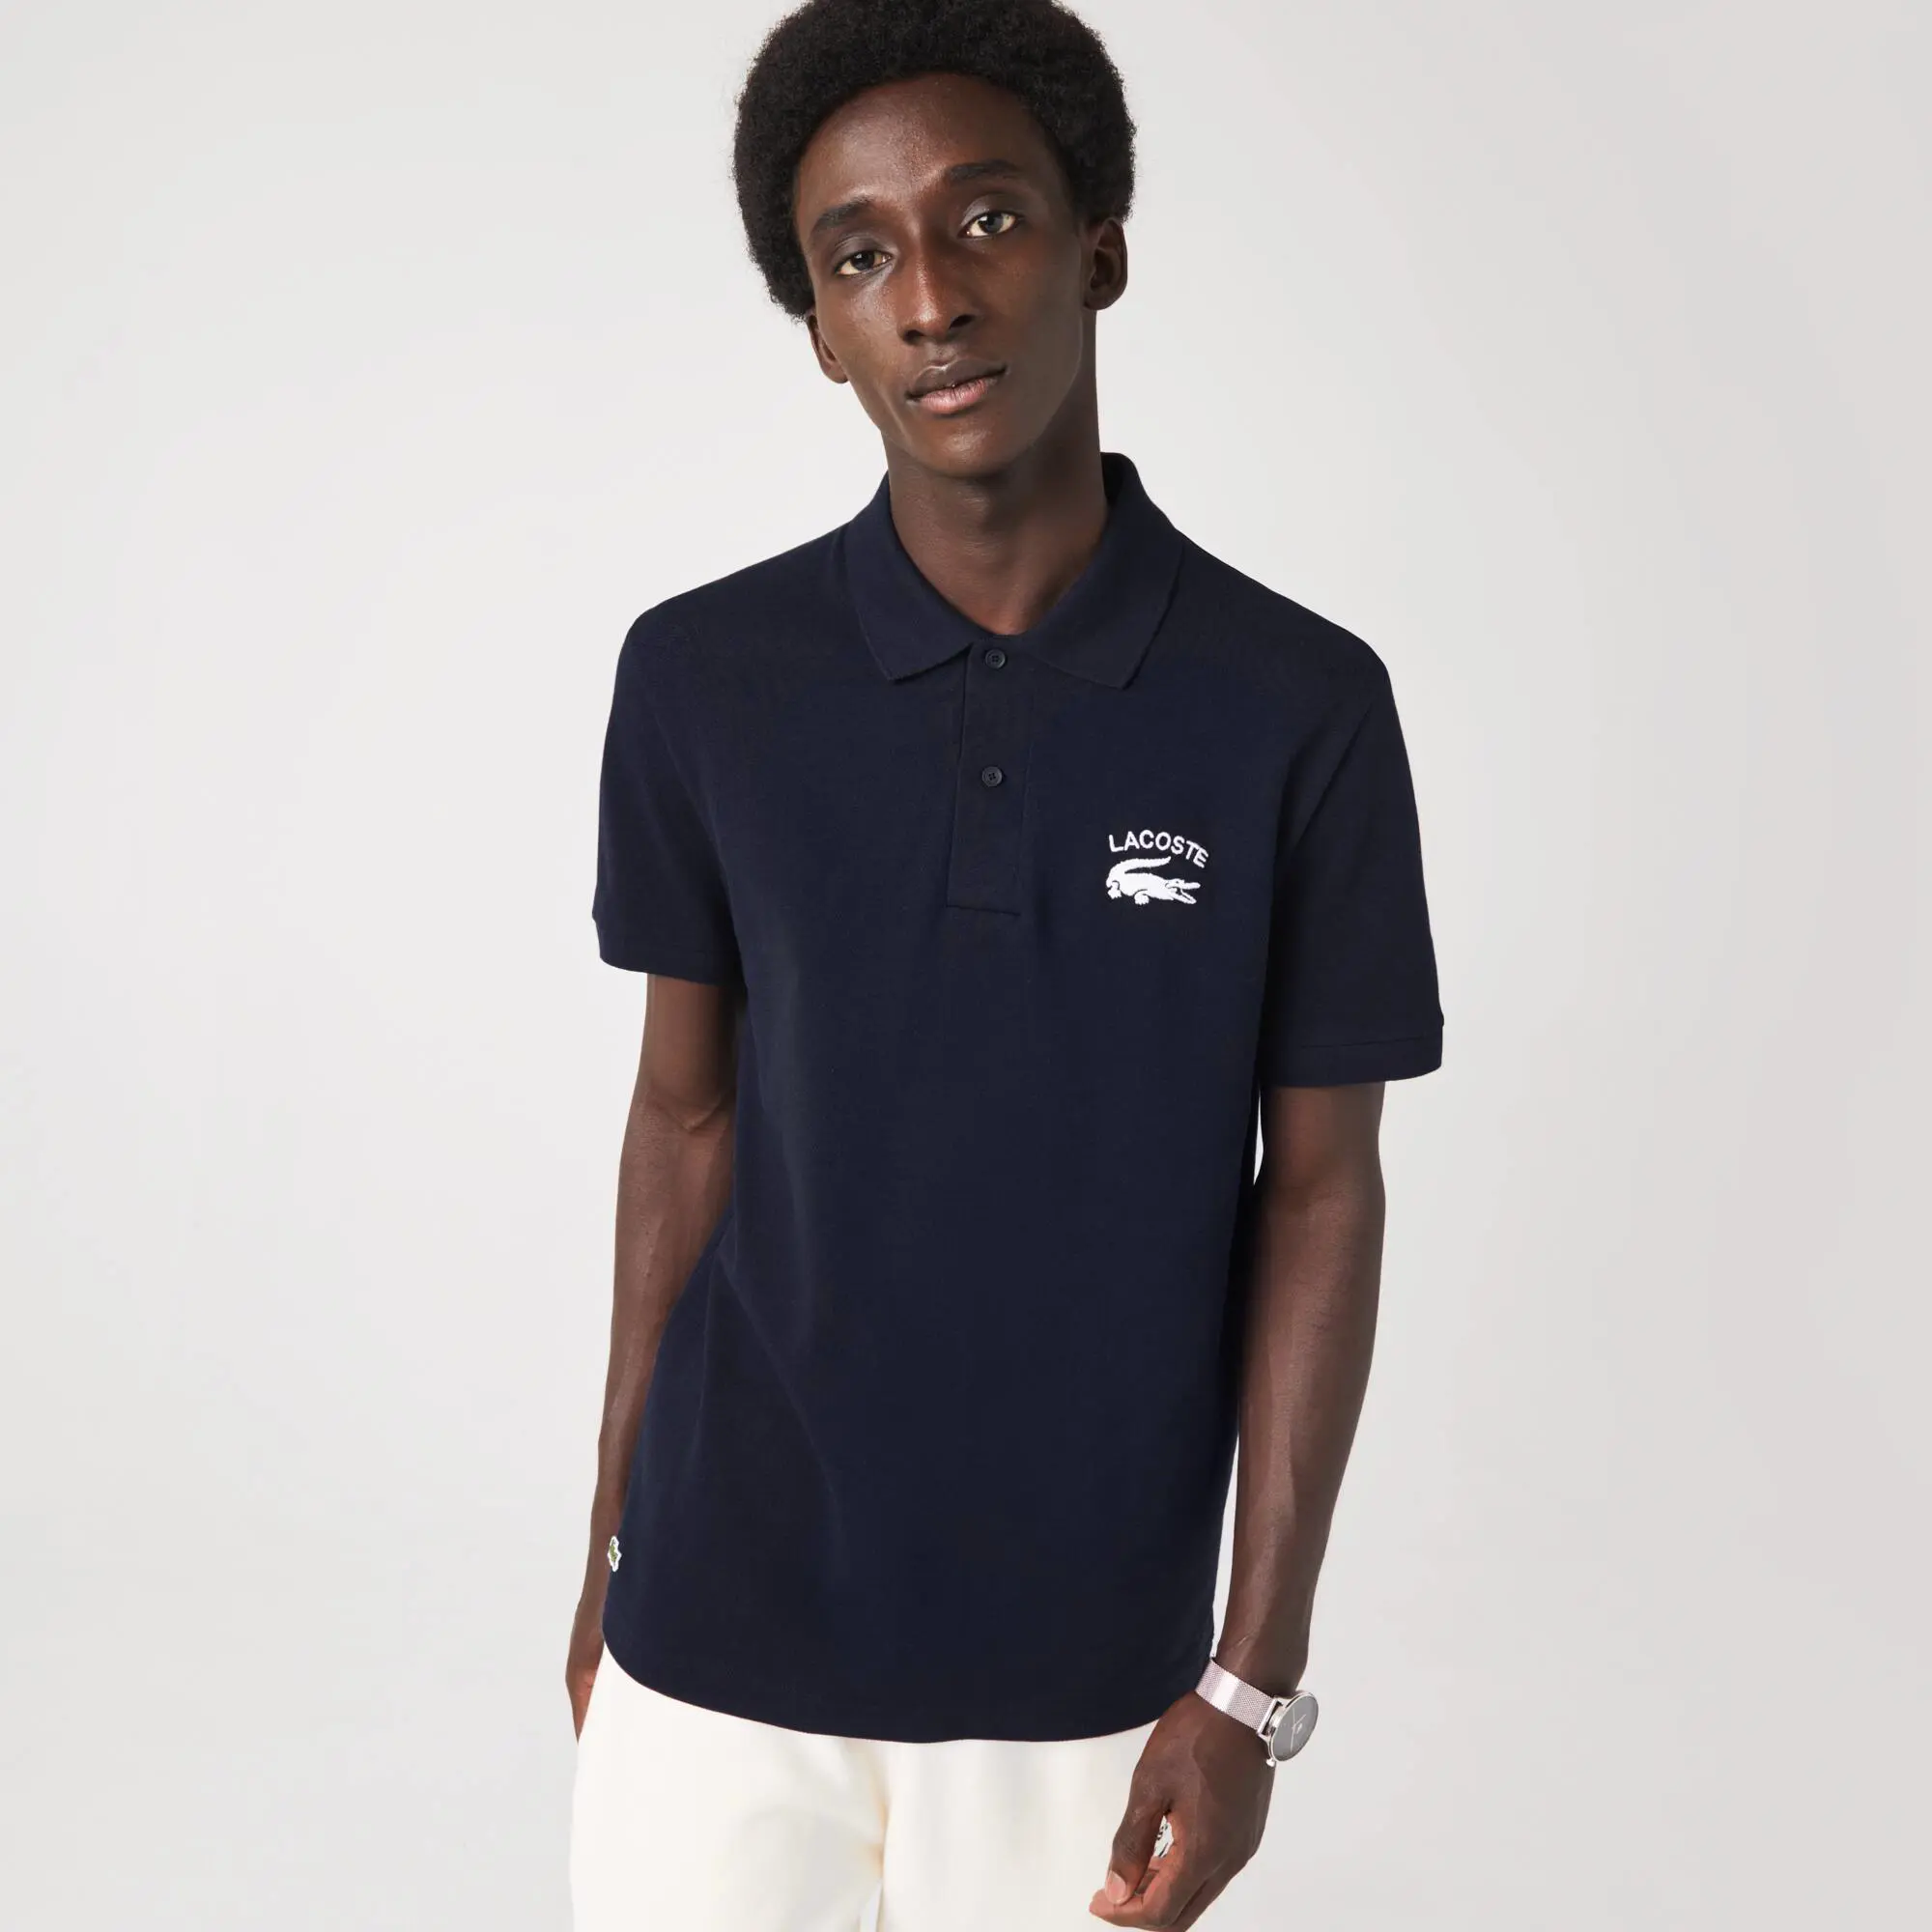 Lacoste Regular Fit Lacoste Branded Stretch Cotton Polo Shirt. 1